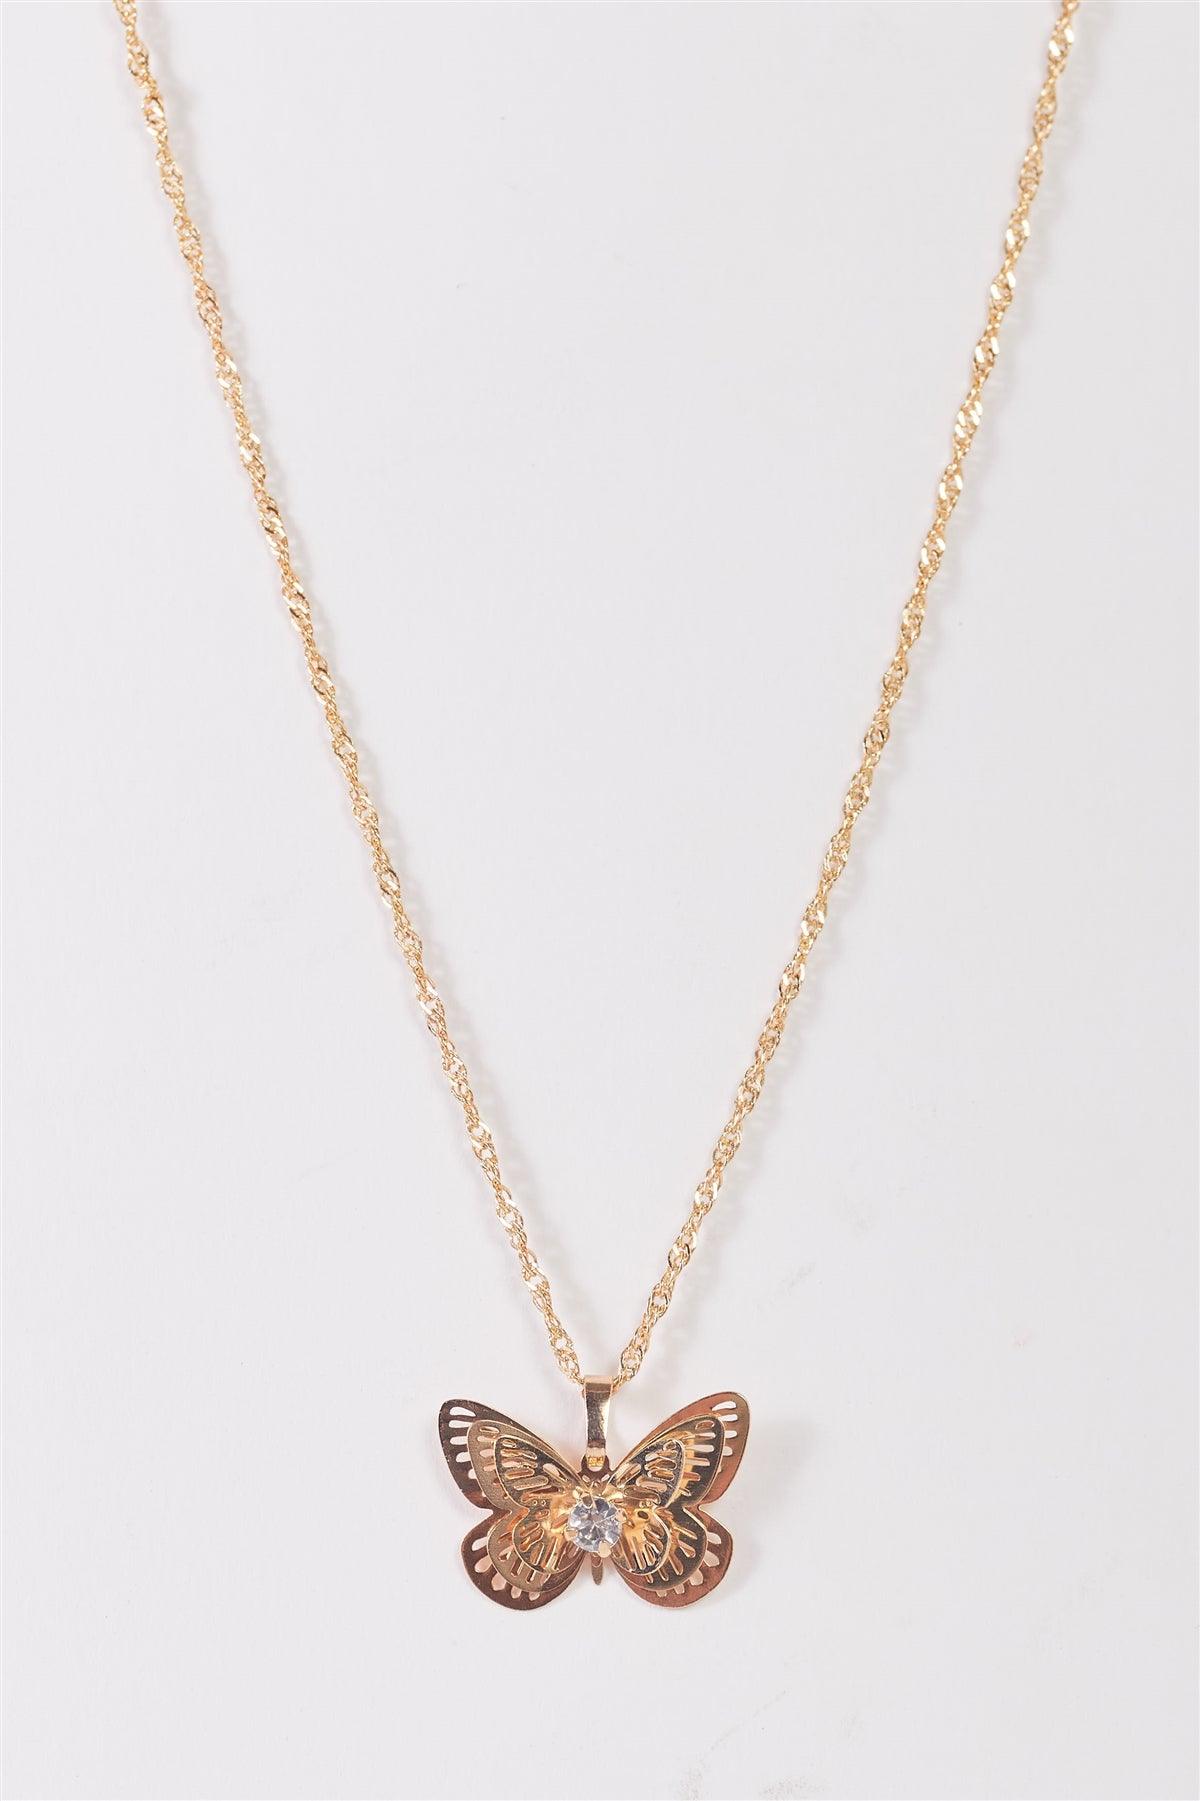 Gold Twisted Chain 3D Butterfly With Faux Swarovski Crystal Necklace /3 Pieces